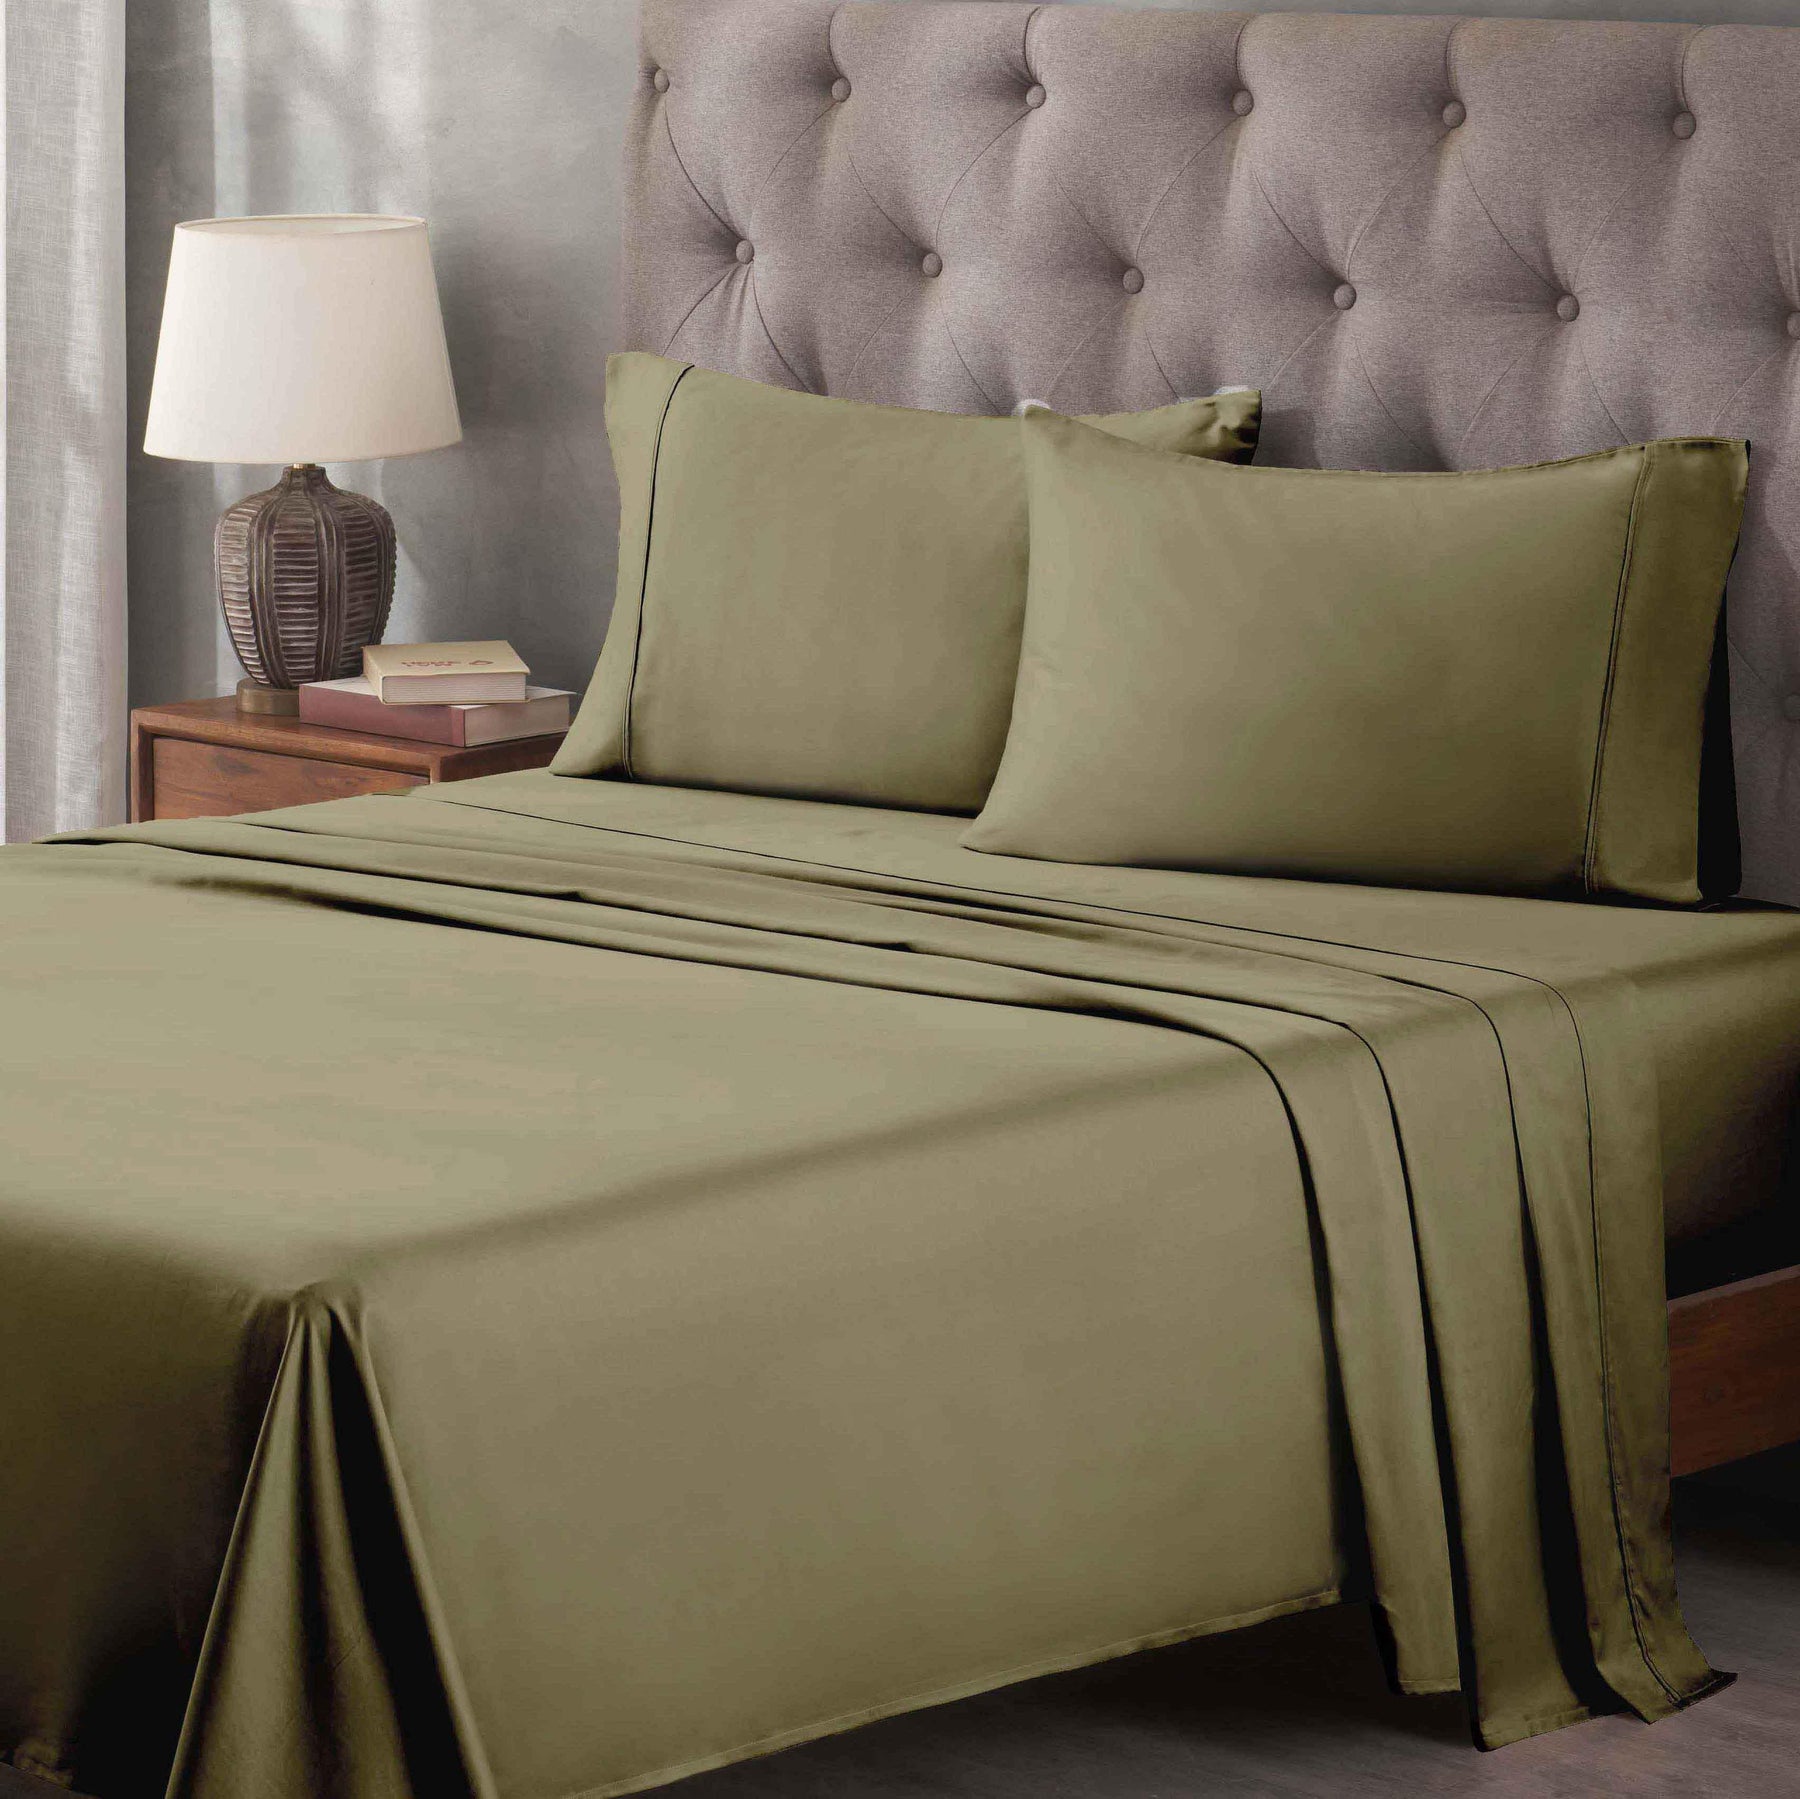 Egyptian Cotton 400 Thread Count Solid Deep Pocket Sheet Set - Sheet Set by Superior - Superior 